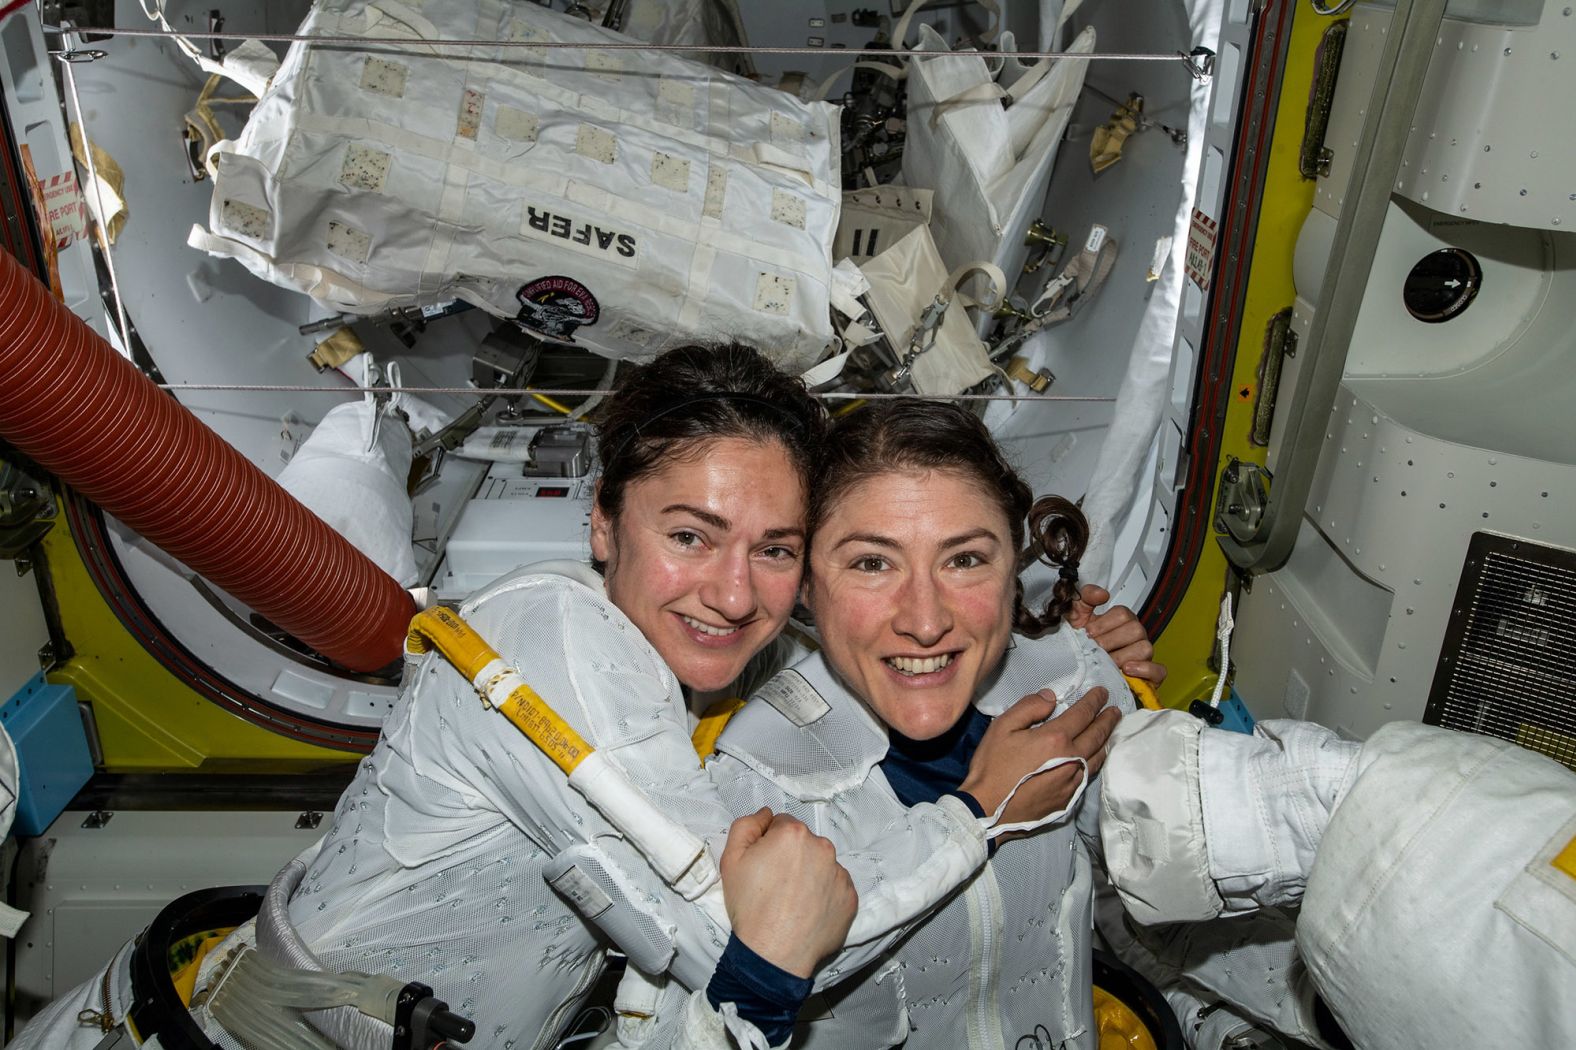 Astronauts Jessica Meir and Christina Koch pose inside the International Space Station. The two conducted the first all-female spacewalk outside of the station in October 2019. "What we're doing now shows all the work that went in for the decades prior, all of the women that worked to get us where we are today," Meir said during a news conference.